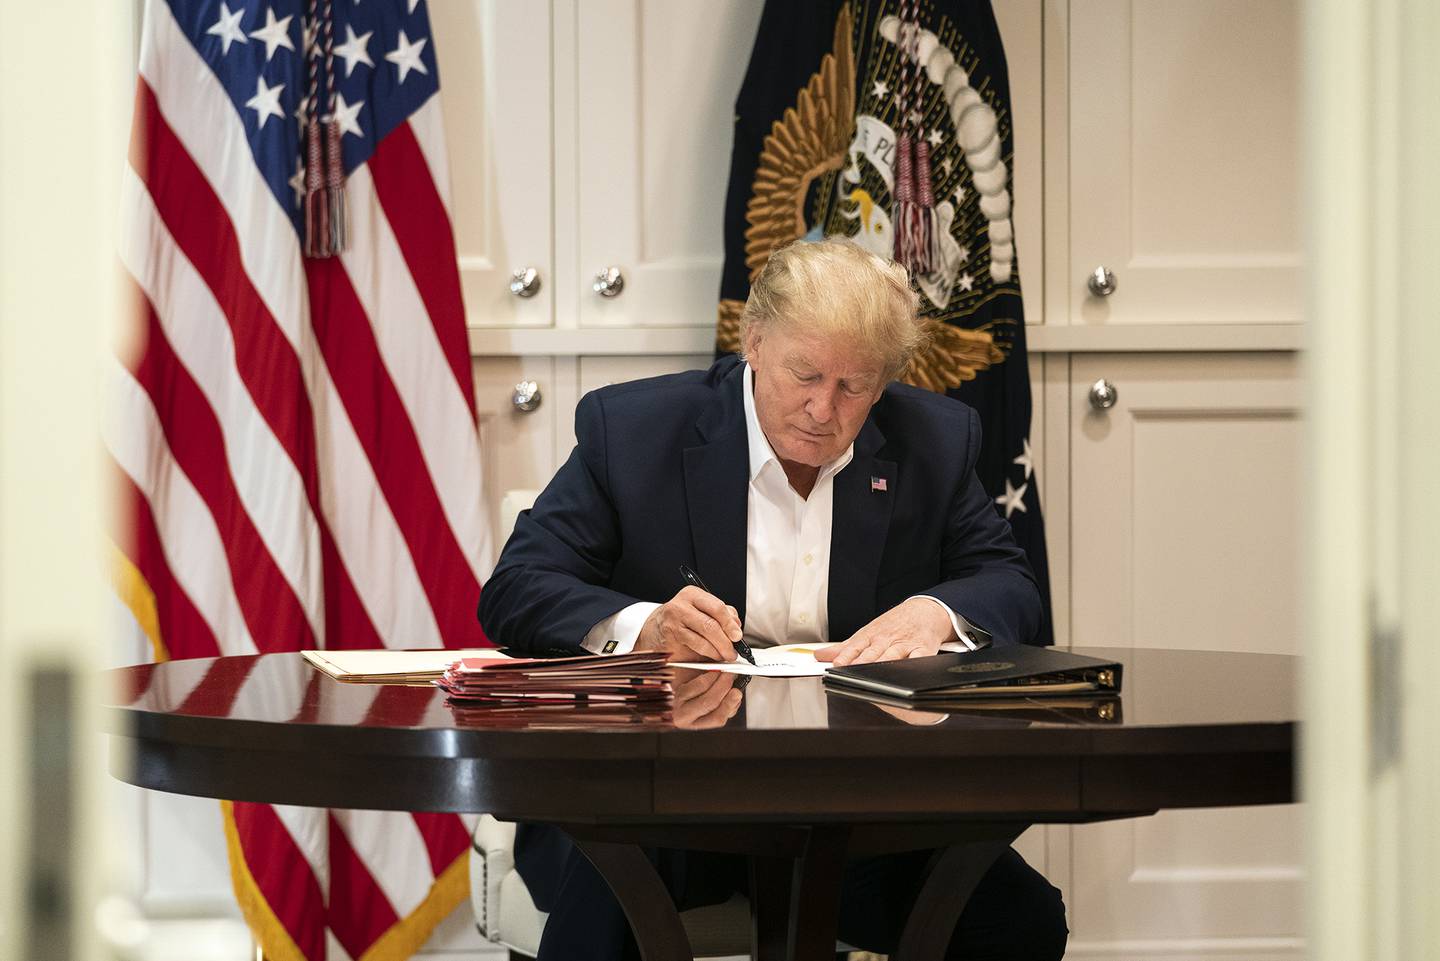 President Donald Trump works in the Presidential Suite at Walter Reed National Military Medical Center in Bethesda, Md., Saturday, Oct. 3, 2020, after testing positive for COVID-19.